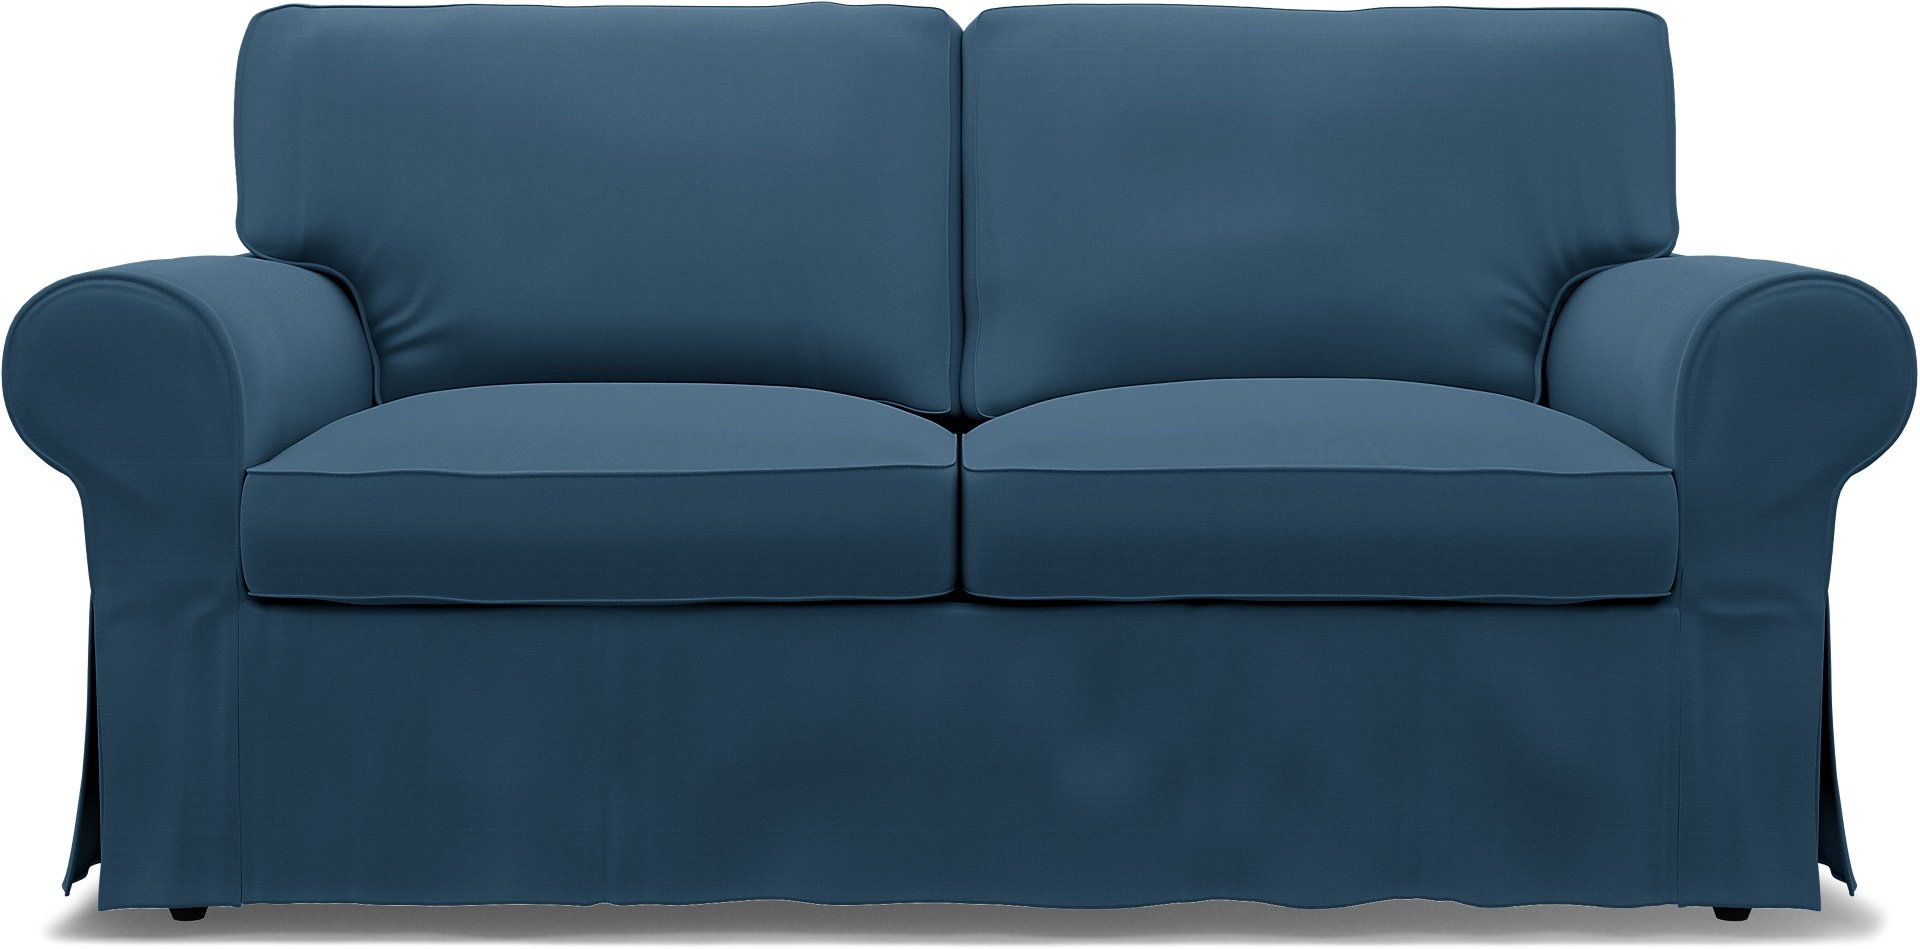 IKEA - Ektorp 2 Seater Sofa Bed Cover, Real Teal, Cotton - Bemz